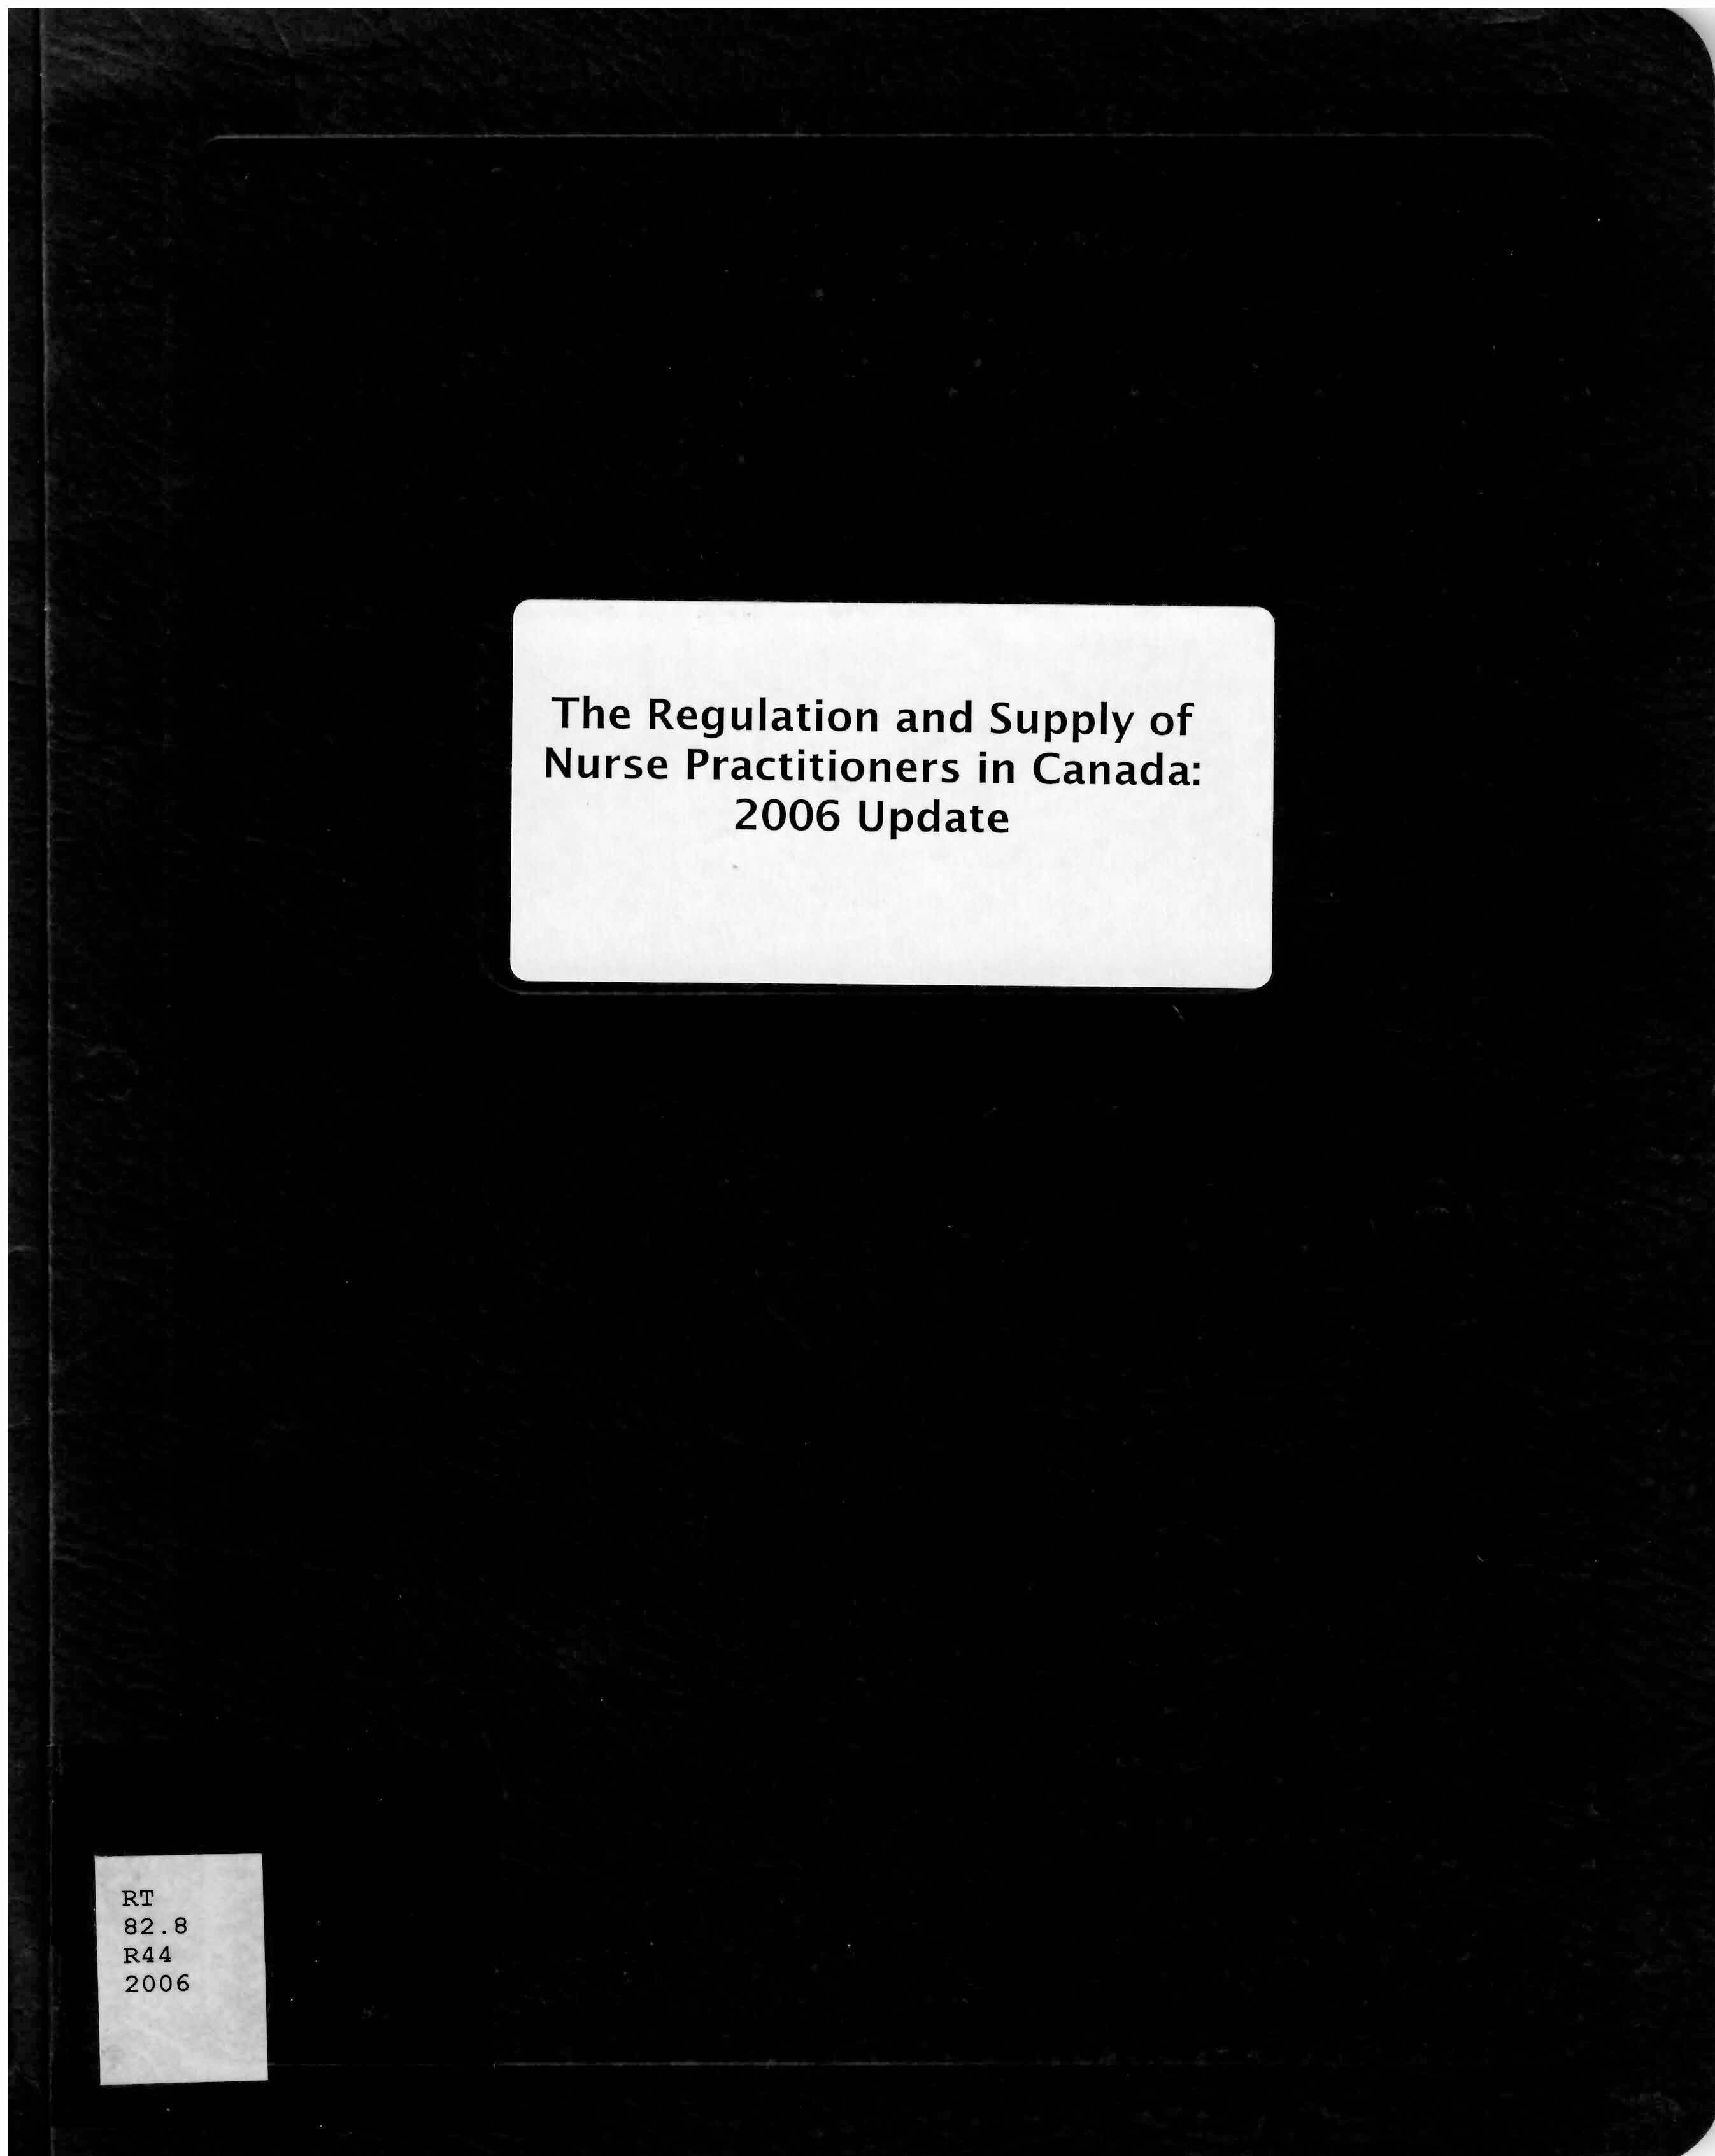 The regulation and supply of nurse practitioners in Canada : 2006 update